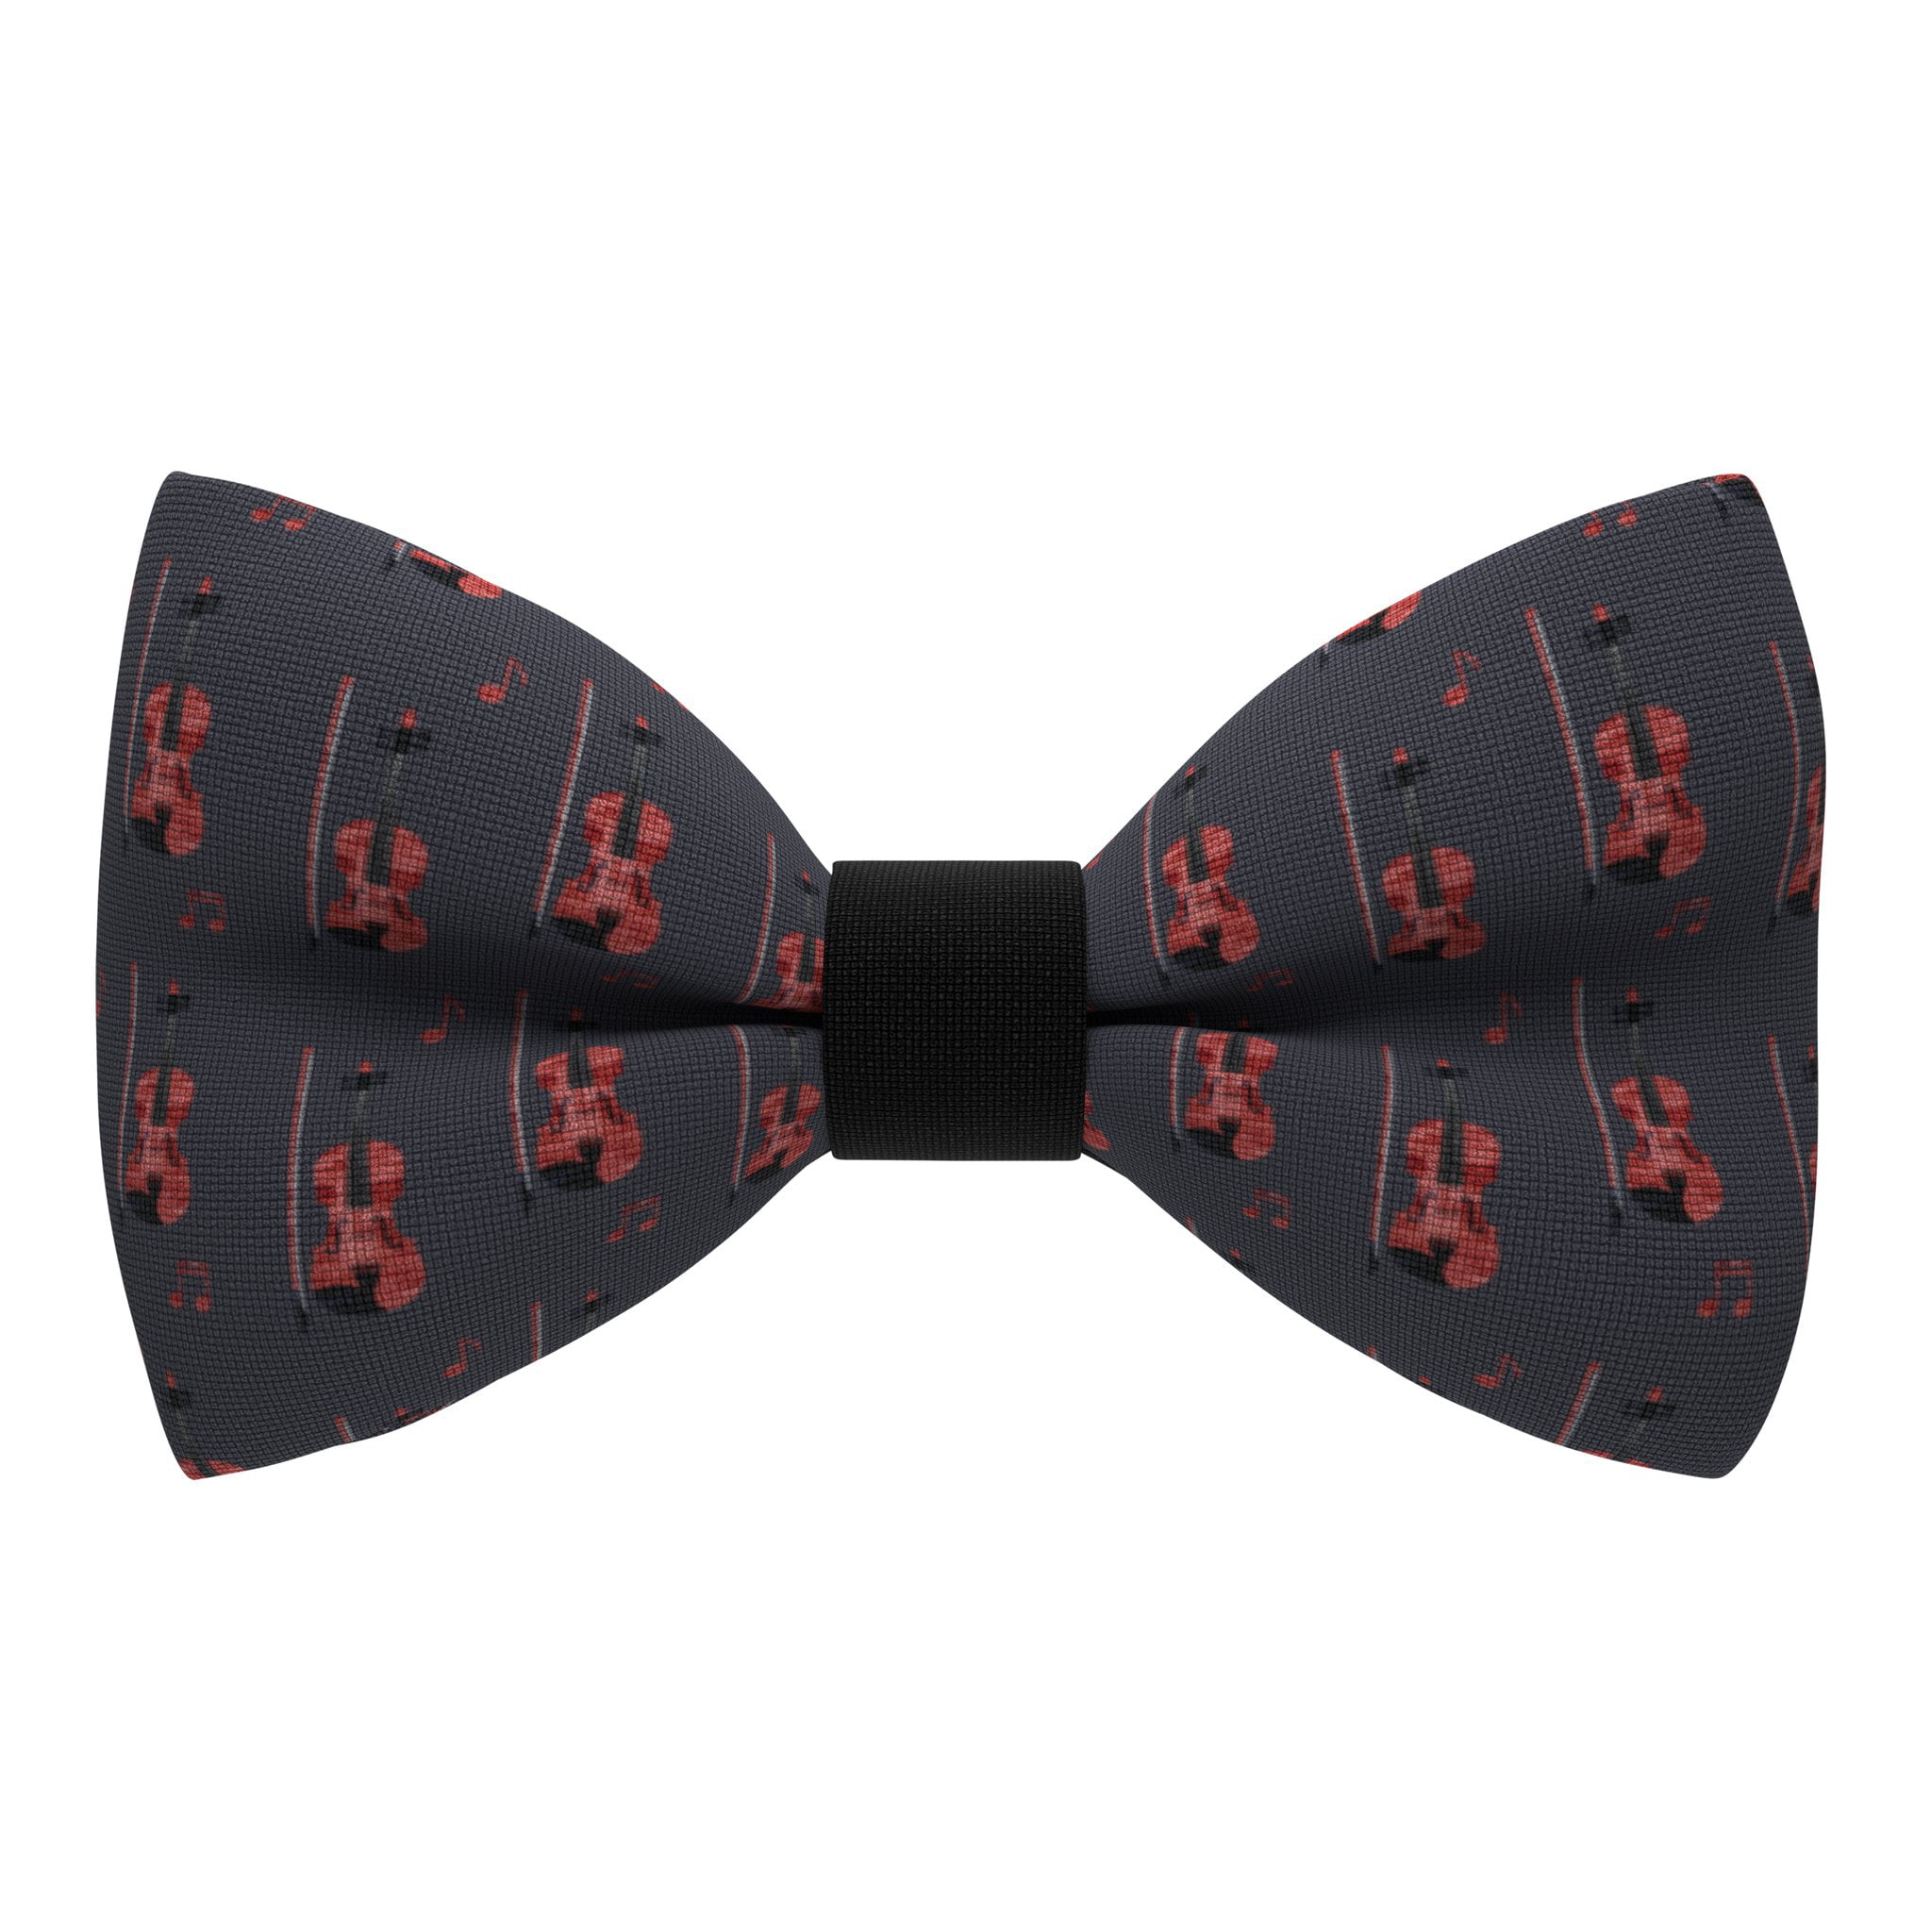 Musical bow tie pre-tied pattern unisex shape, by Bow Tie House (Large ...